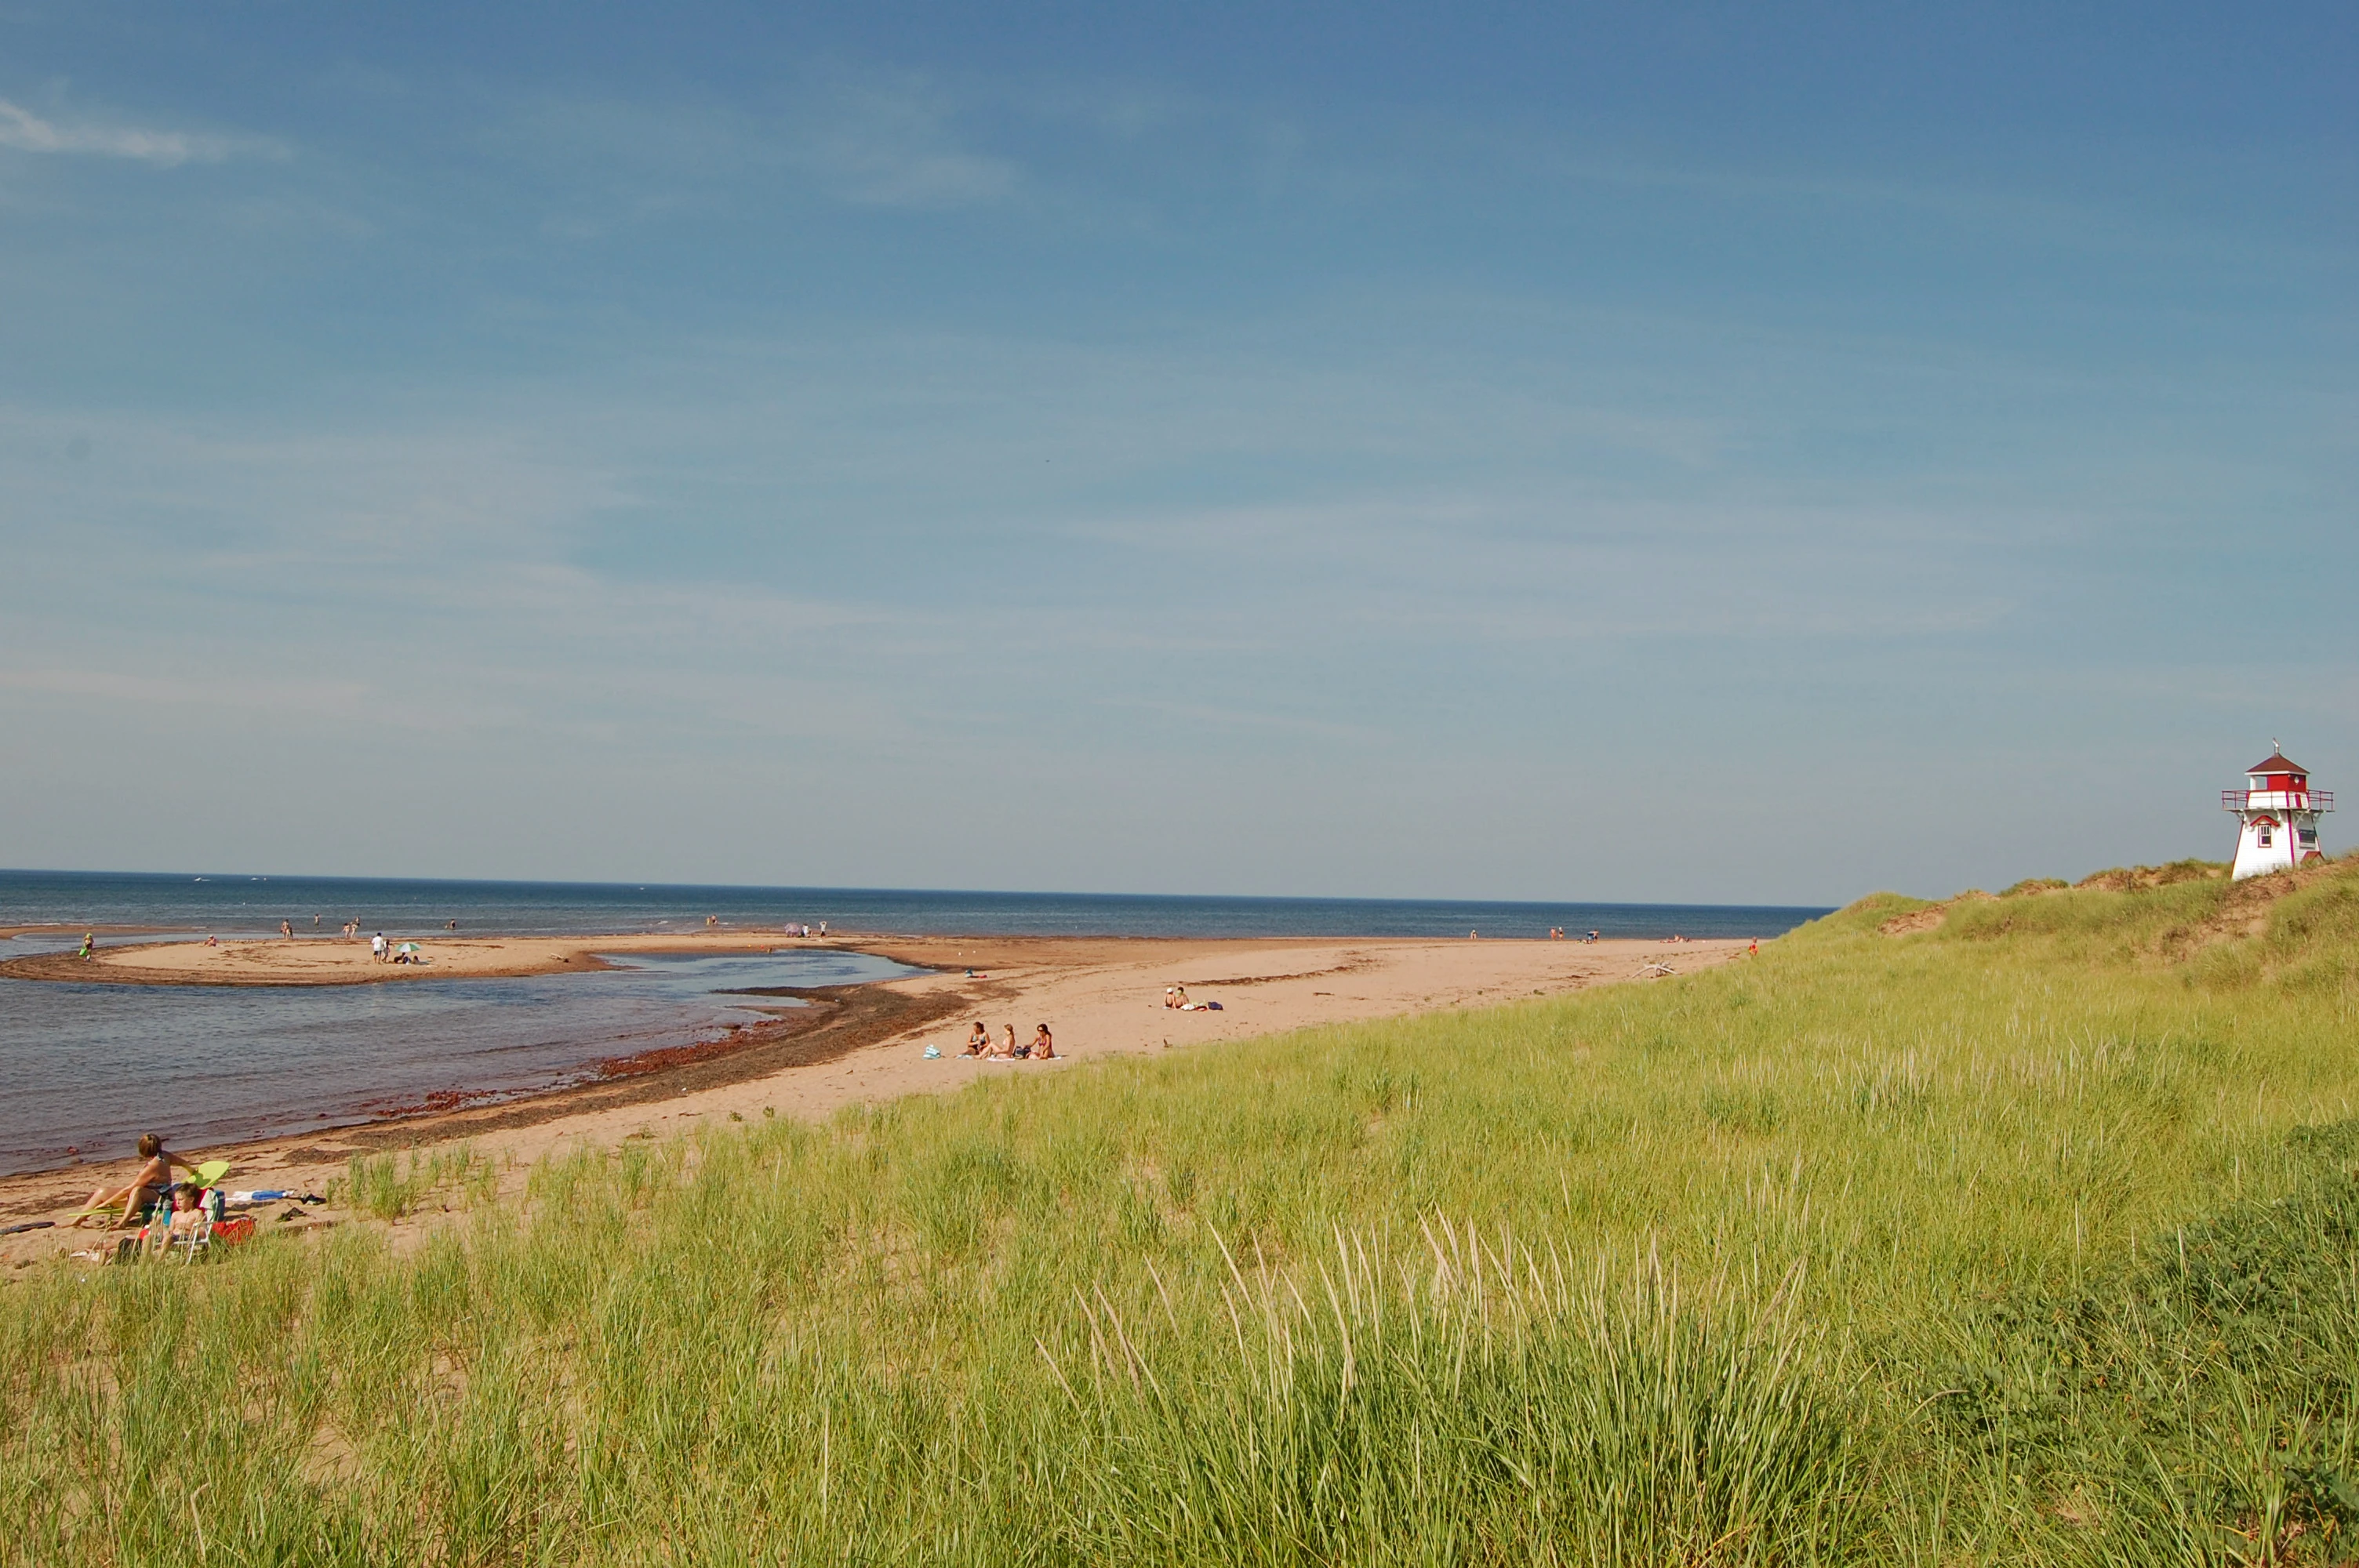 A view of Prince Edward Island National Park